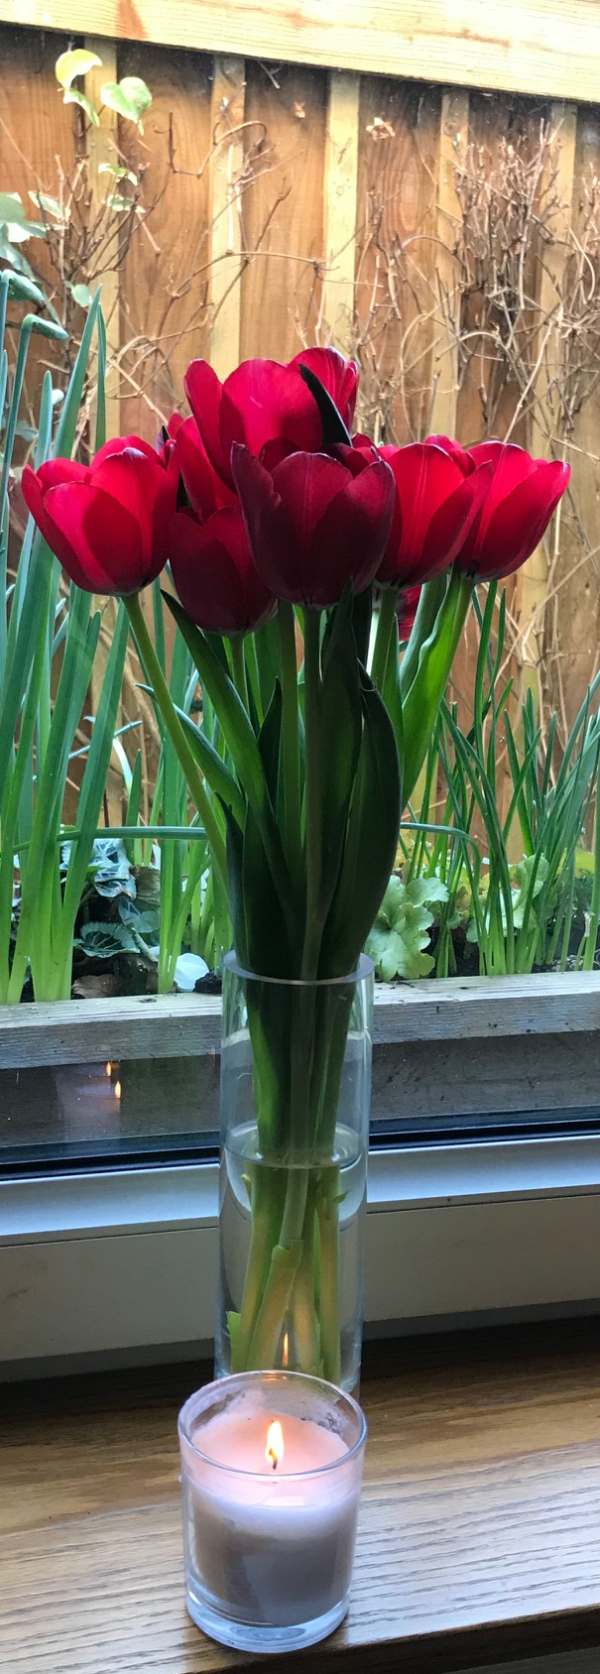 Lighting a Candle for Diddley in Laural Cottage with the tulips.